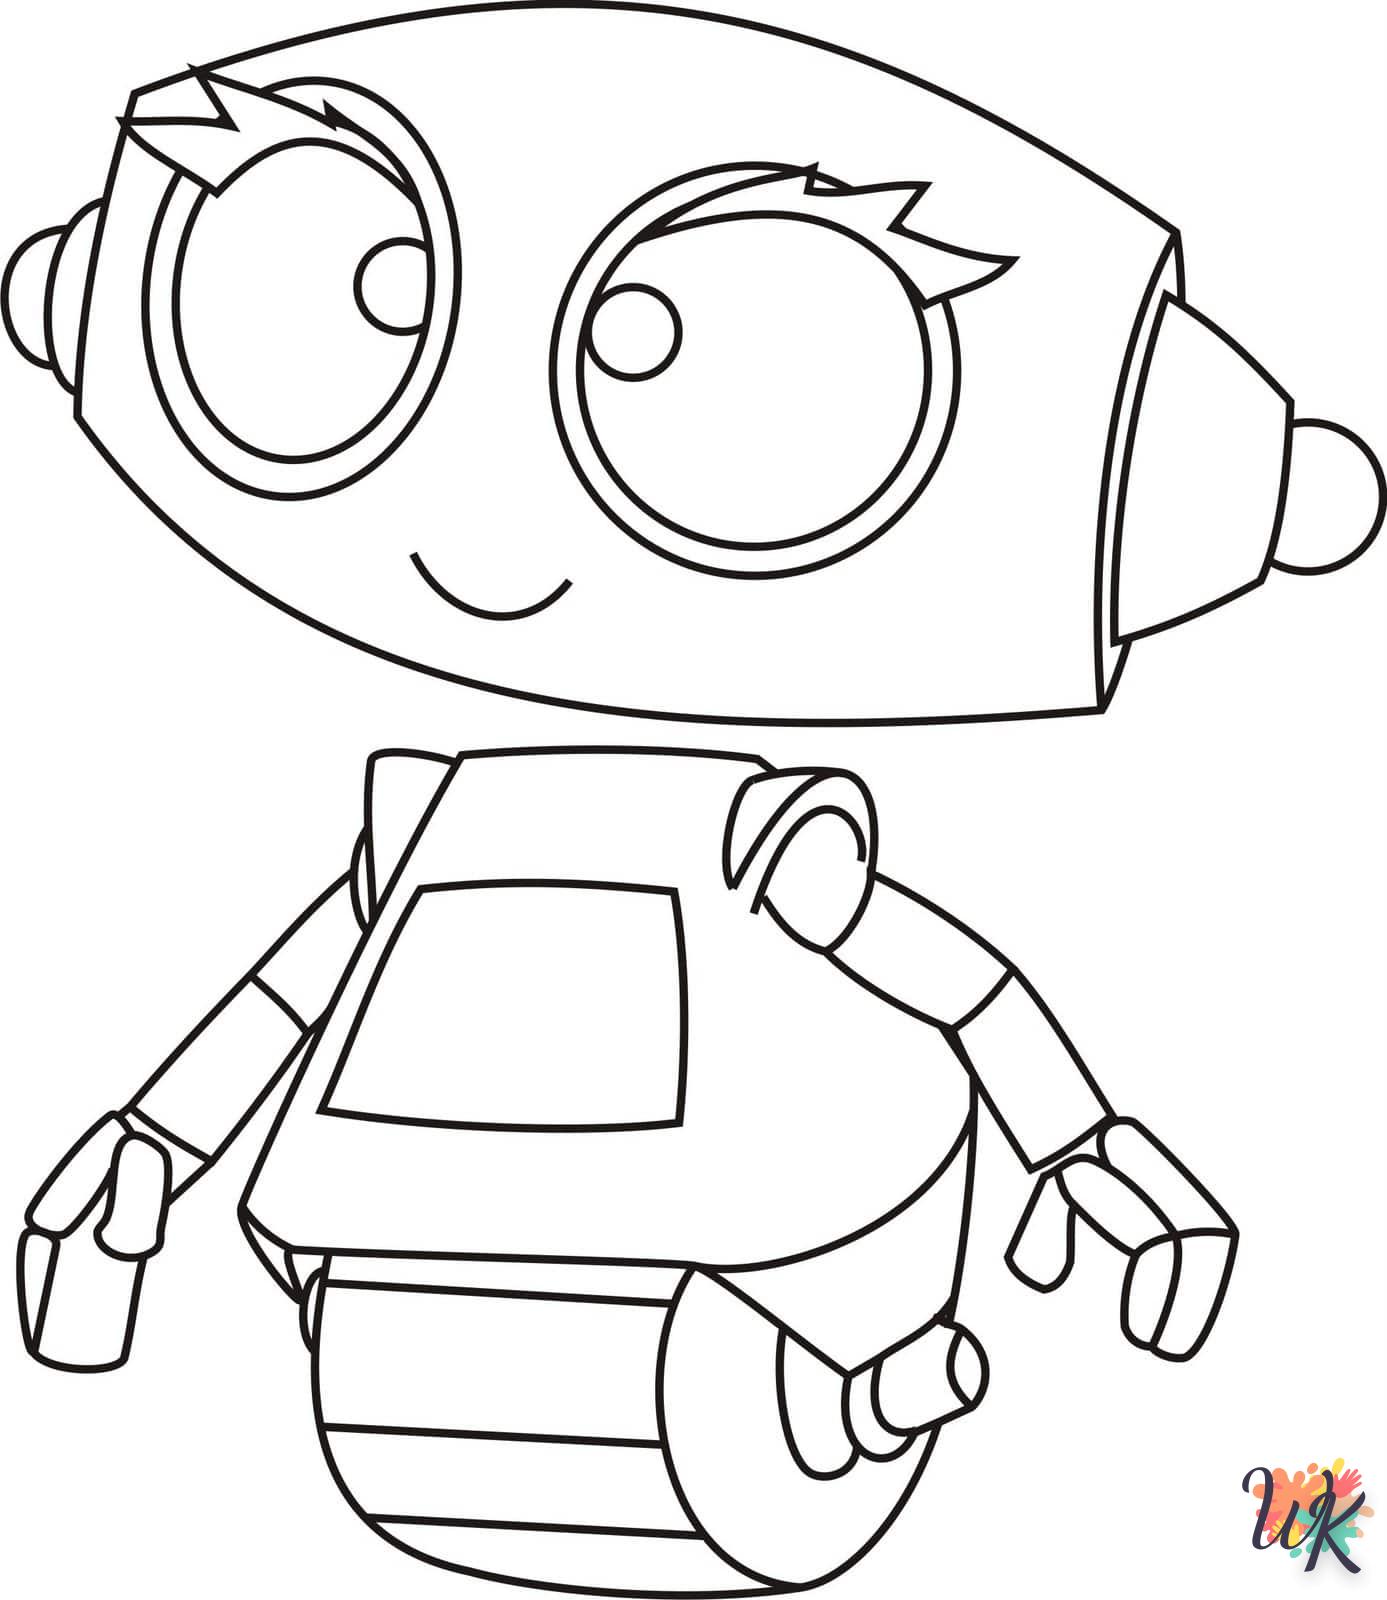 Robot coloring page to print free